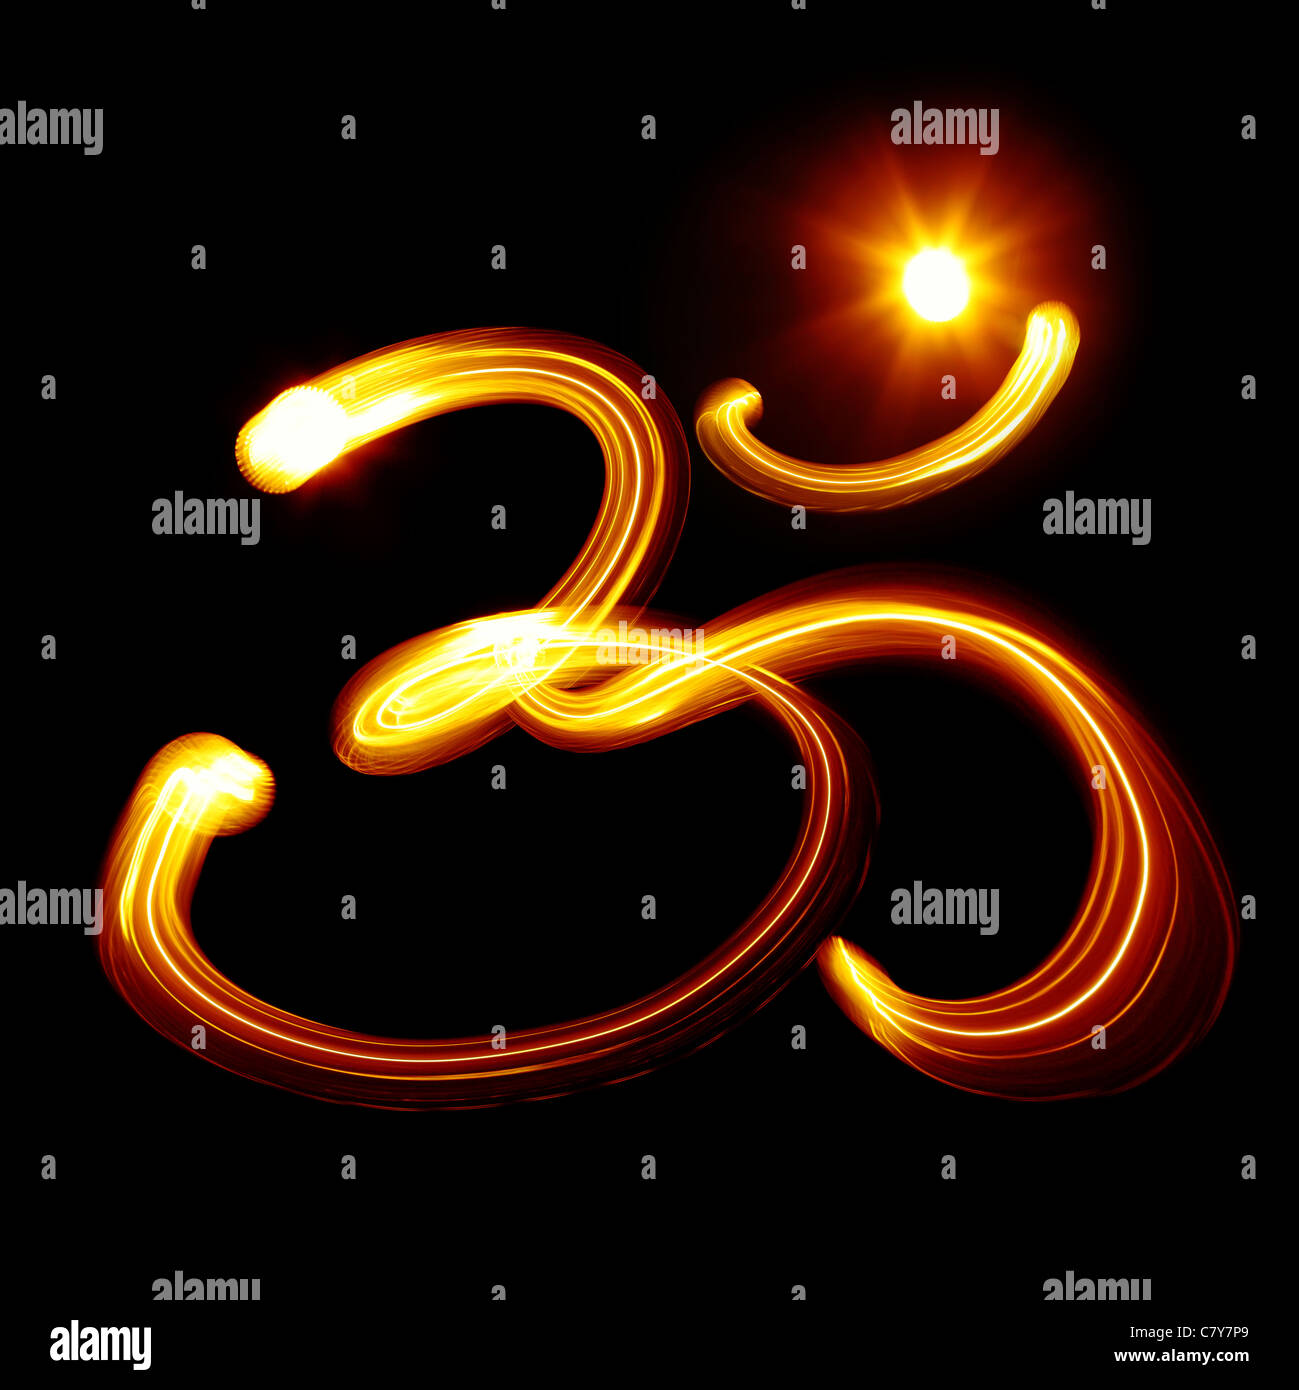 Sacred Om syllable created by light over black background Stock Photo